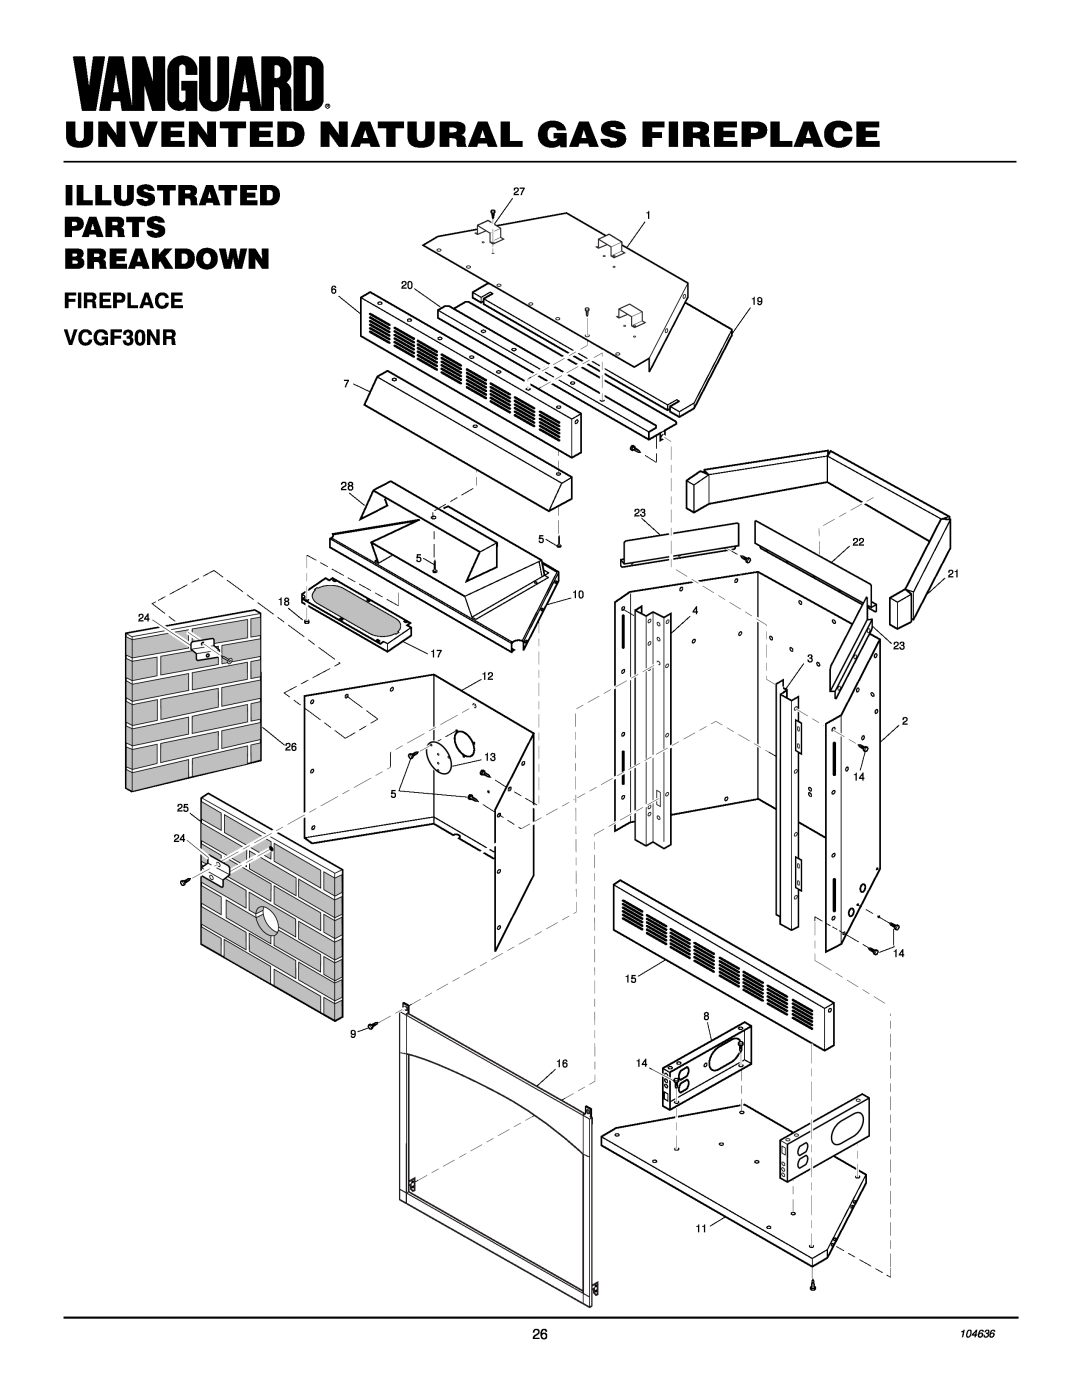 Desa FIREPLACE VCGF30NR, Unvented Natural Gas Fireplace, Illustrated Parts Breakdown, 23 5 5 10 17 12 13, 1614, 104636 